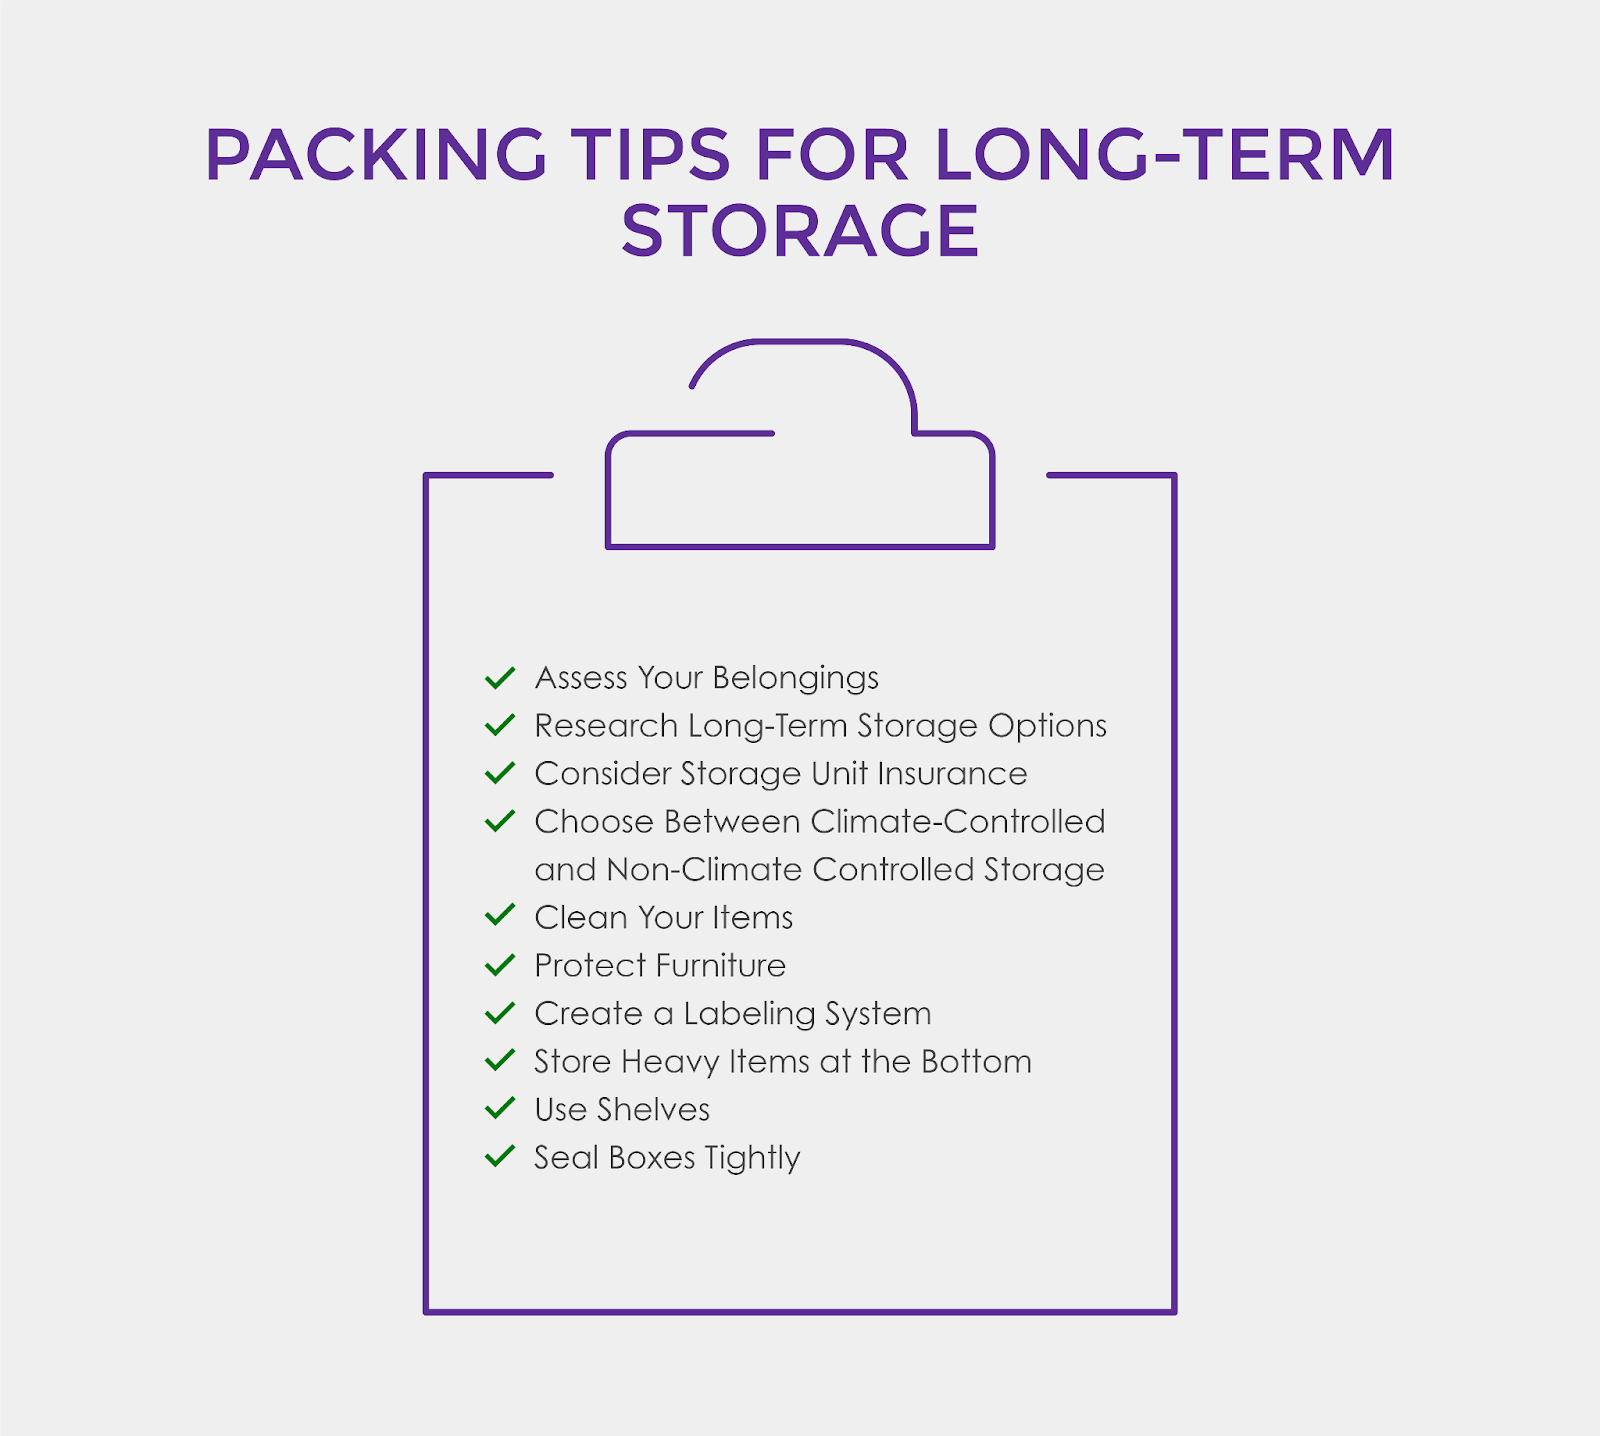 Packing tips for long-term storage